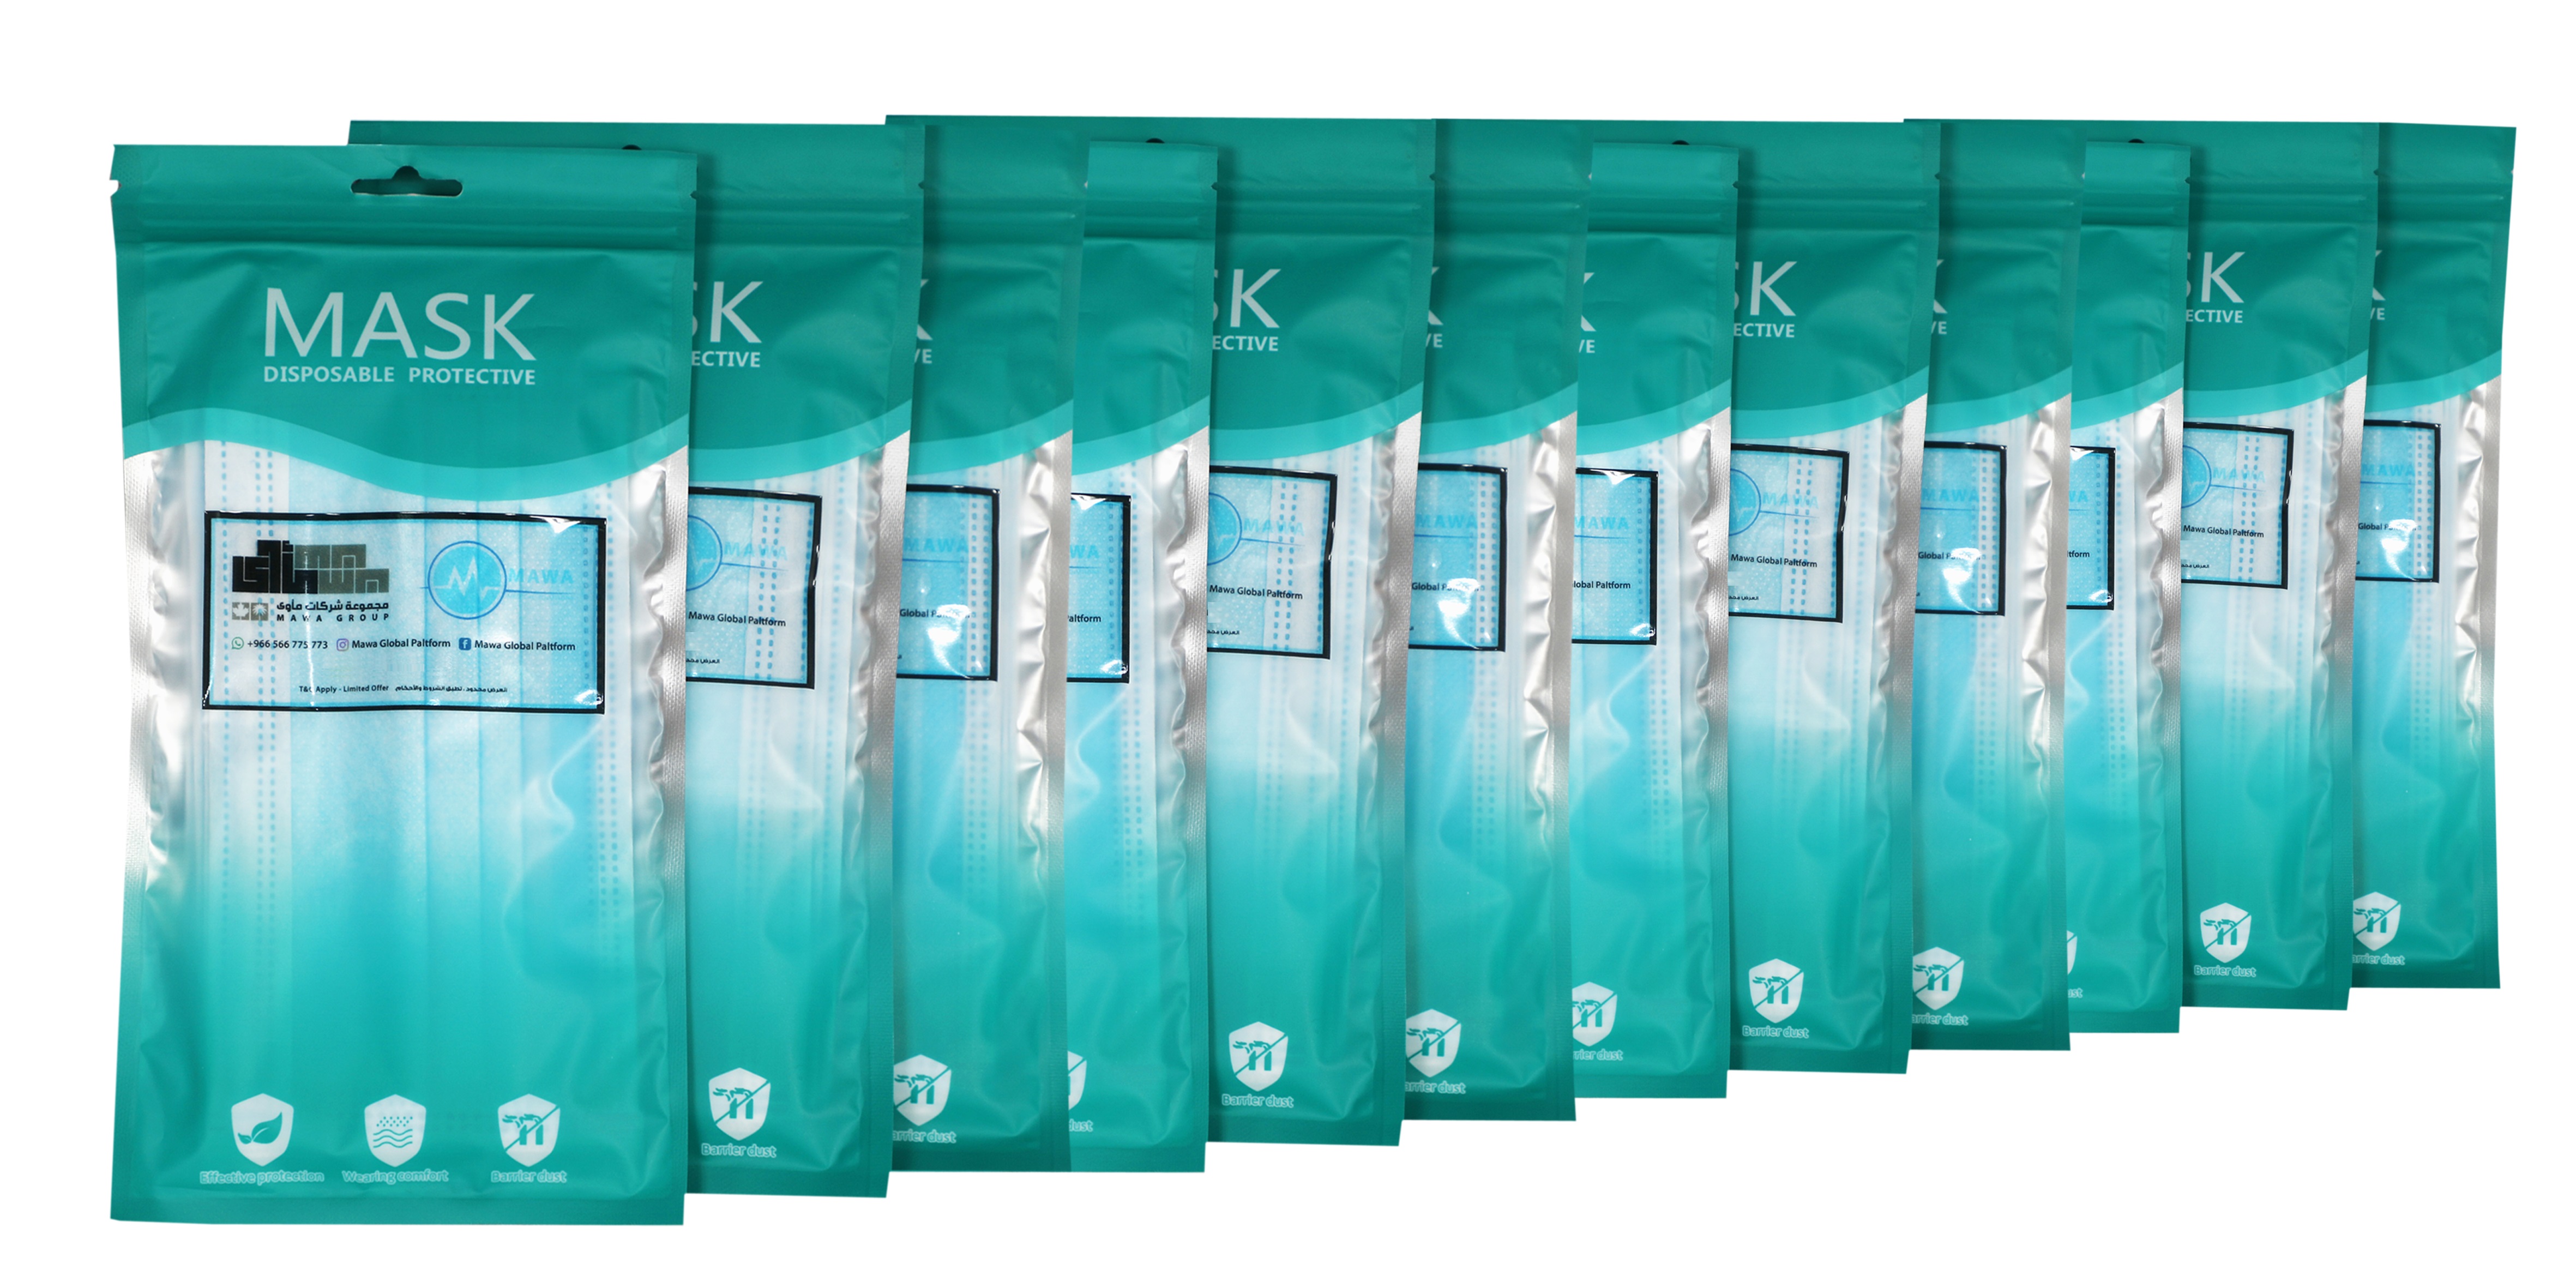 Set of 12 packs, each pack includes 5 disposable, 3-layers masks